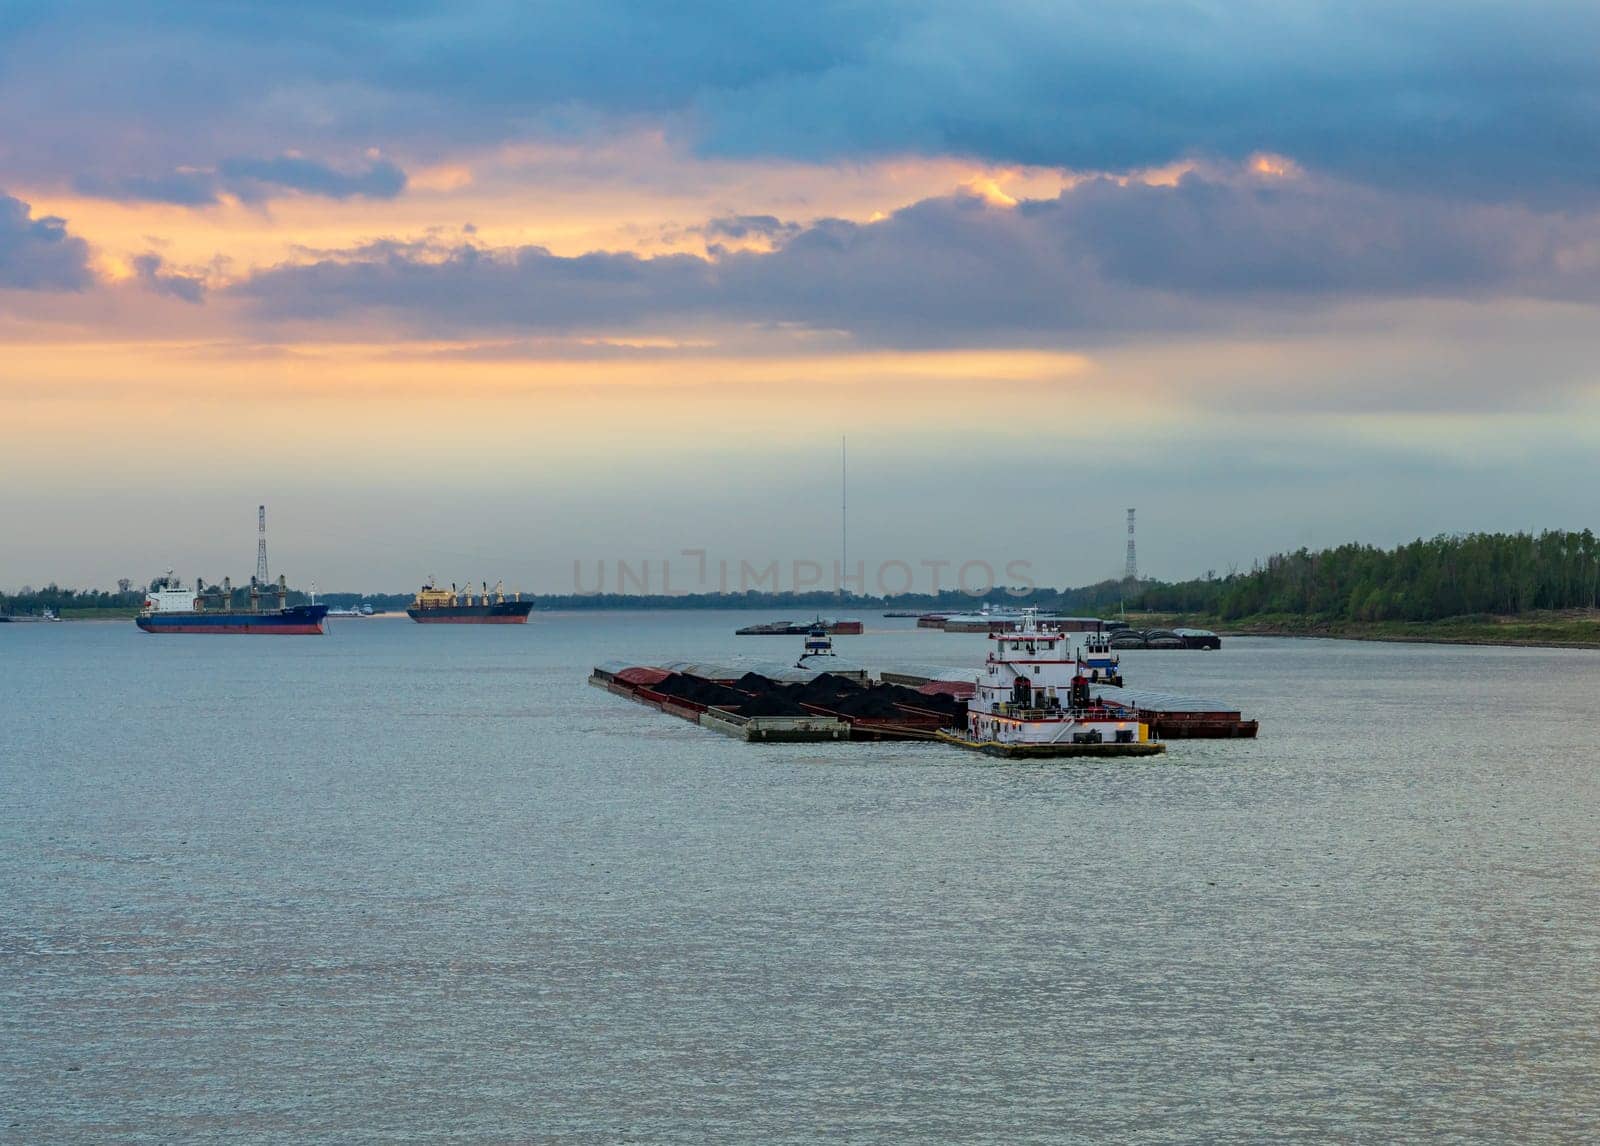 Sunset over the coal barge in Baton Rouge, Louisiana by steheap